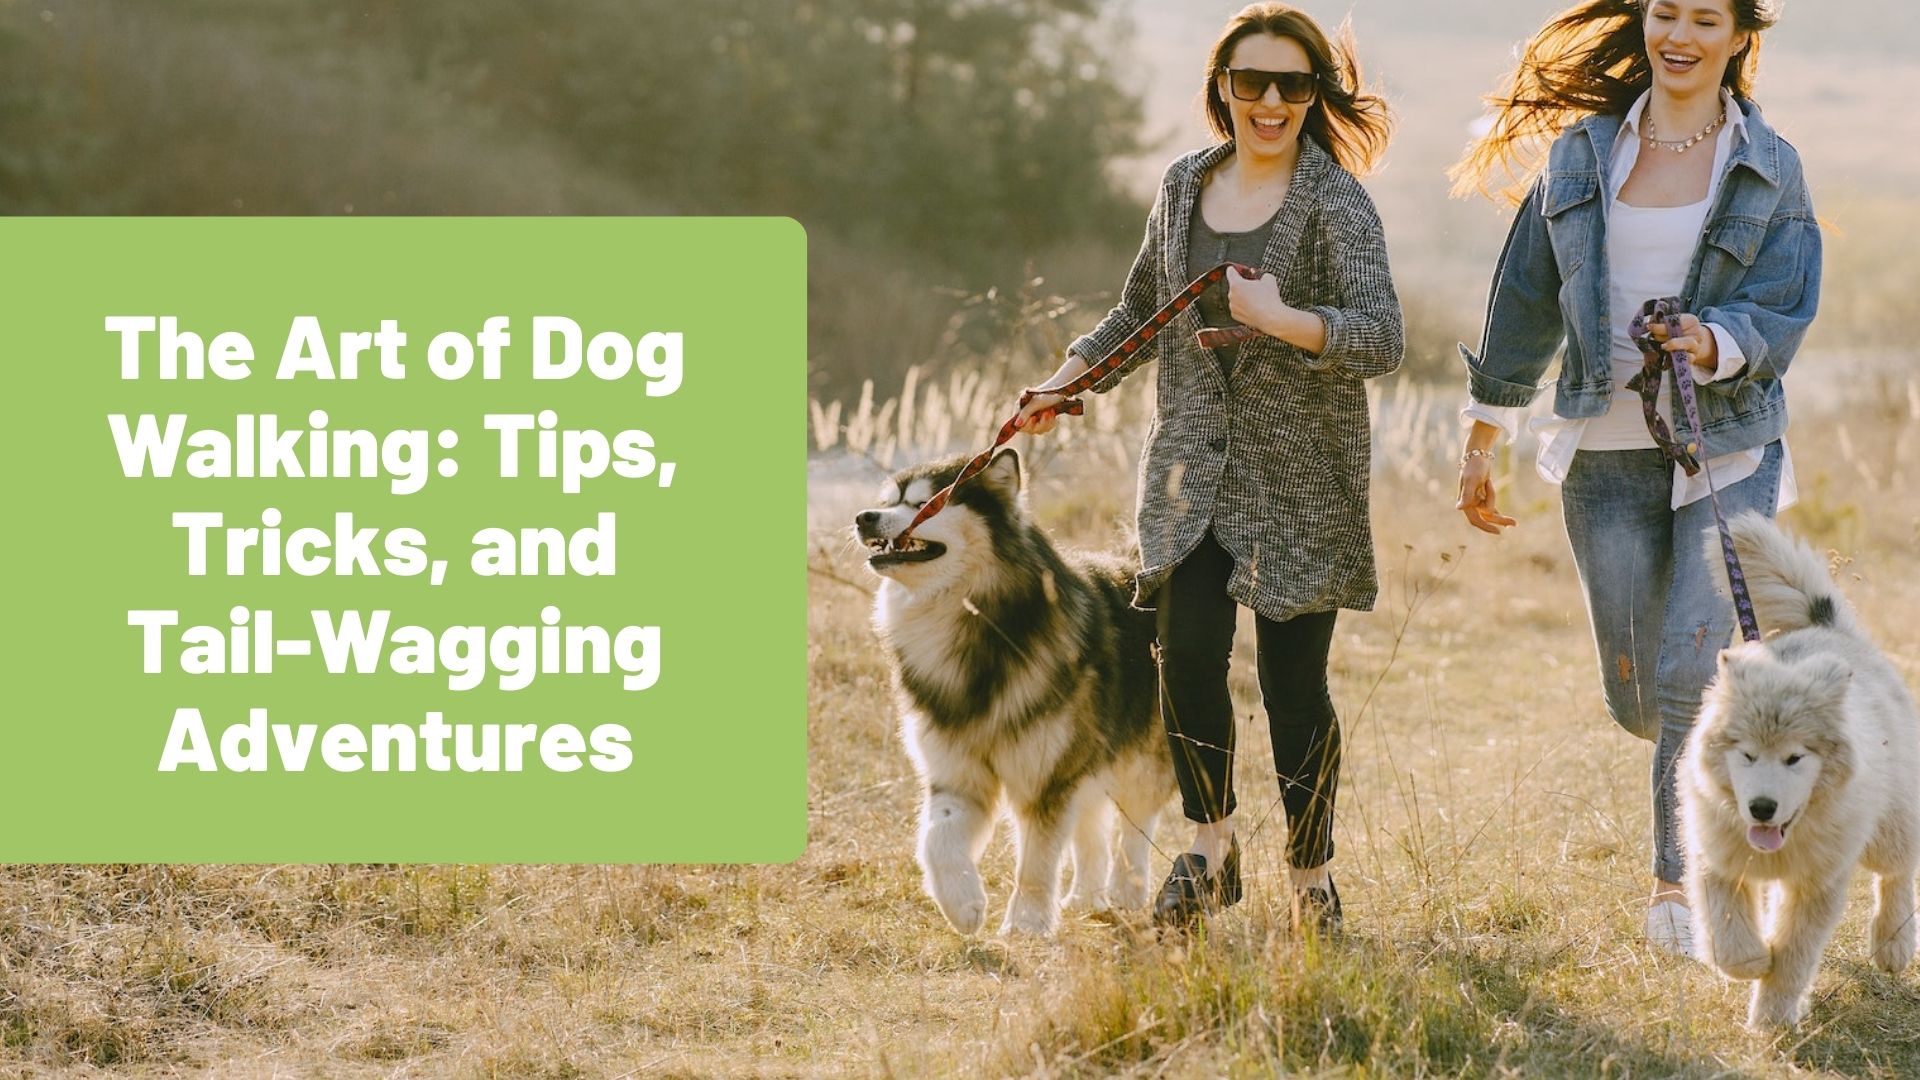 The Art of Dog Walking: Tips, Tricks, and Tail-Wagging Adventures - RawOrigins.pet - The Raw Dog Food Company